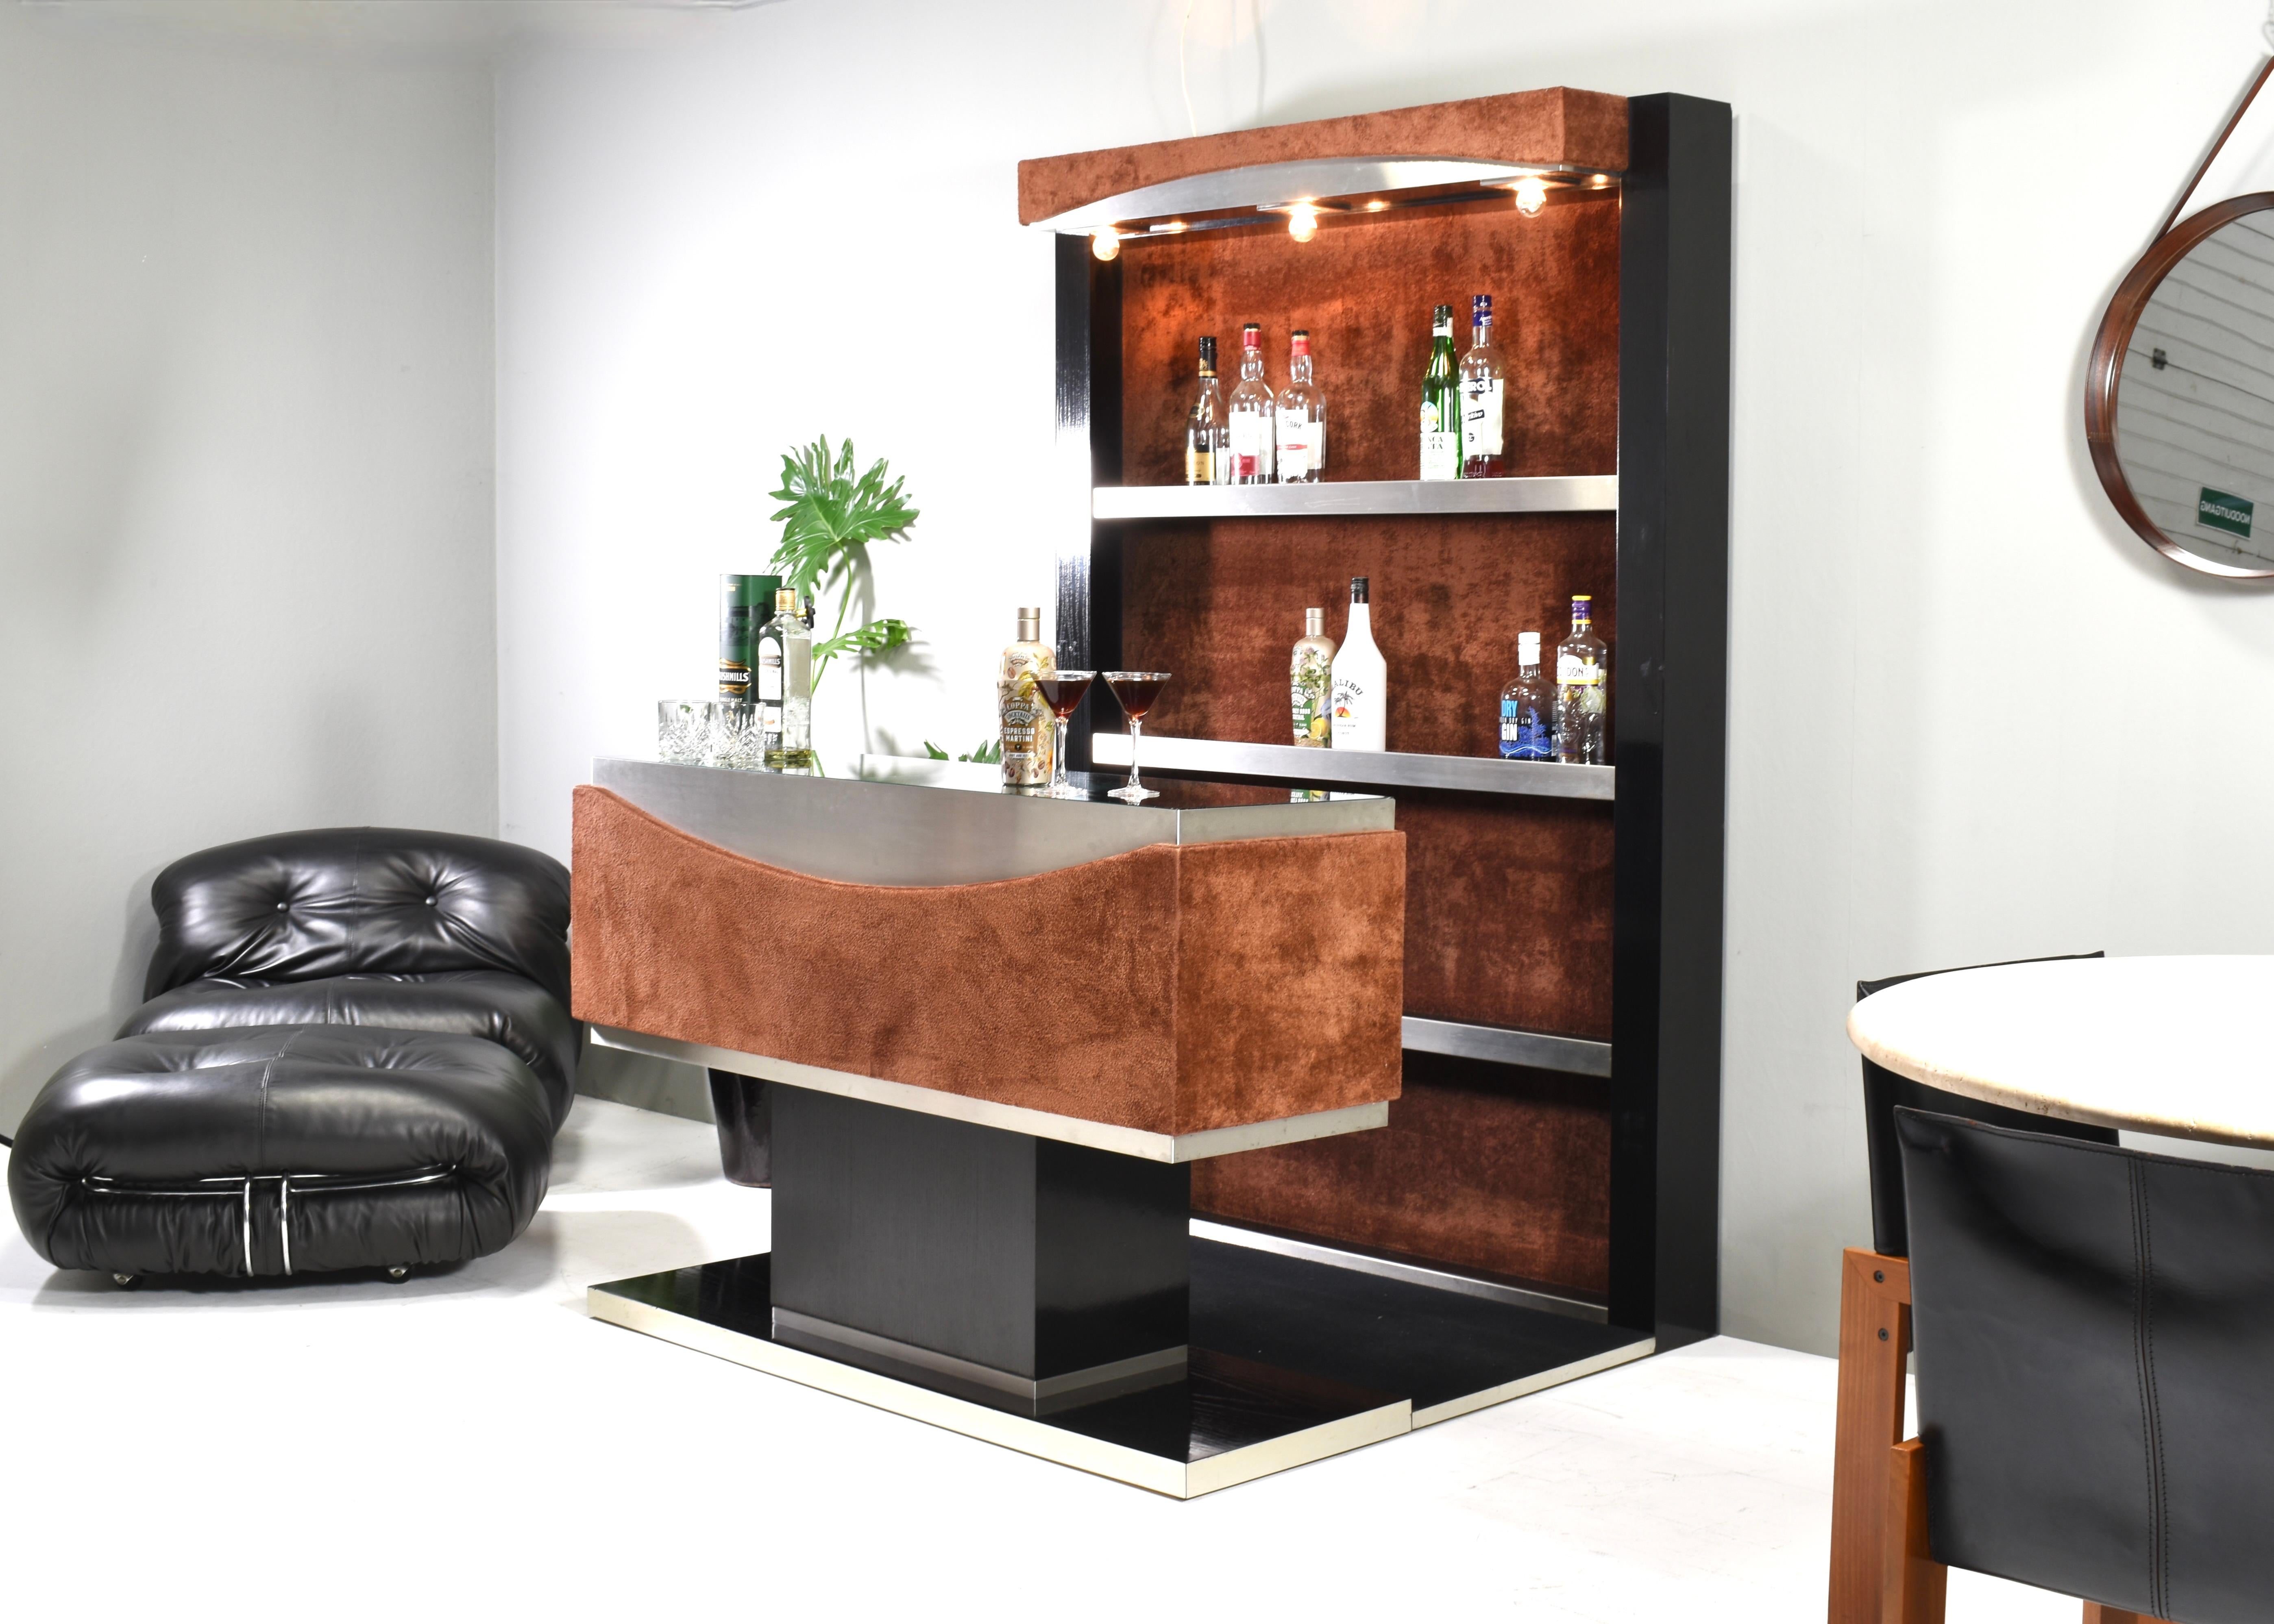 Stunning 1970's Italian cocktail dry bar in Ebonized wood and Brown teddy fabric covering. The bar is designed by or in the style of Willy Rizzo.
It features beautiful brown pluche teddy covering, black ebonized wood, lighting, chrome details, glass